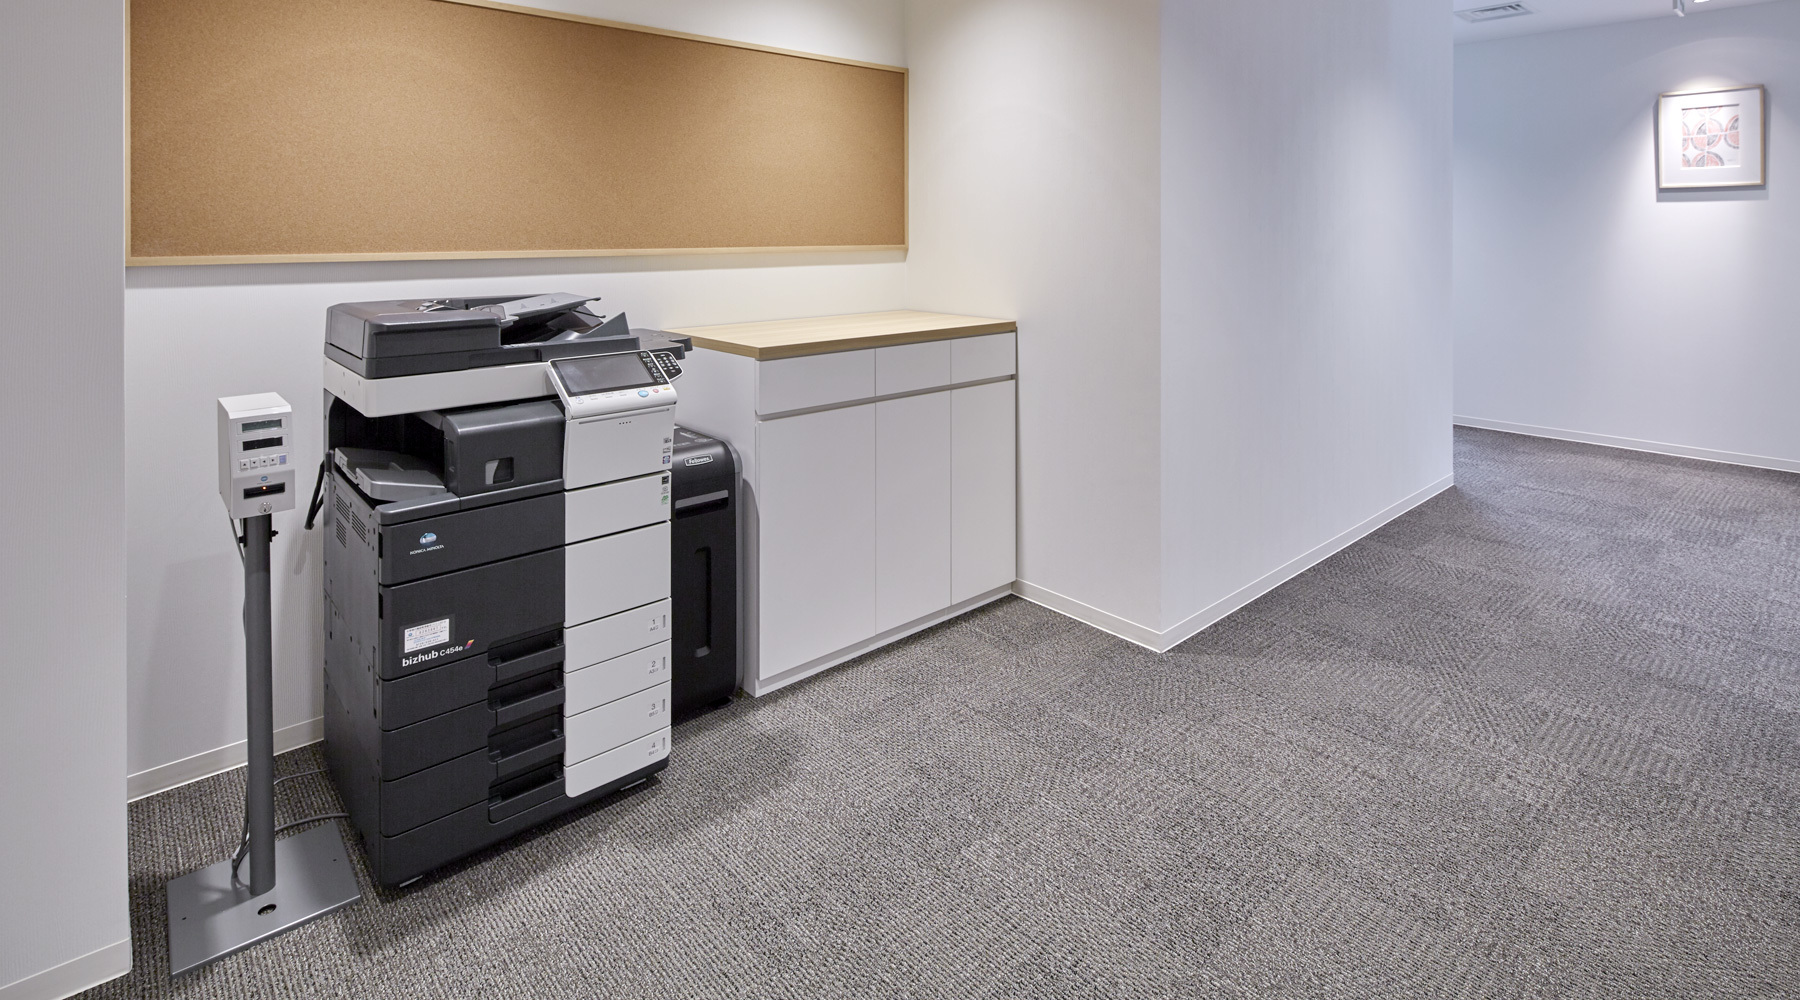 Copy Corner _ Equipped with shared copy machines, etc.